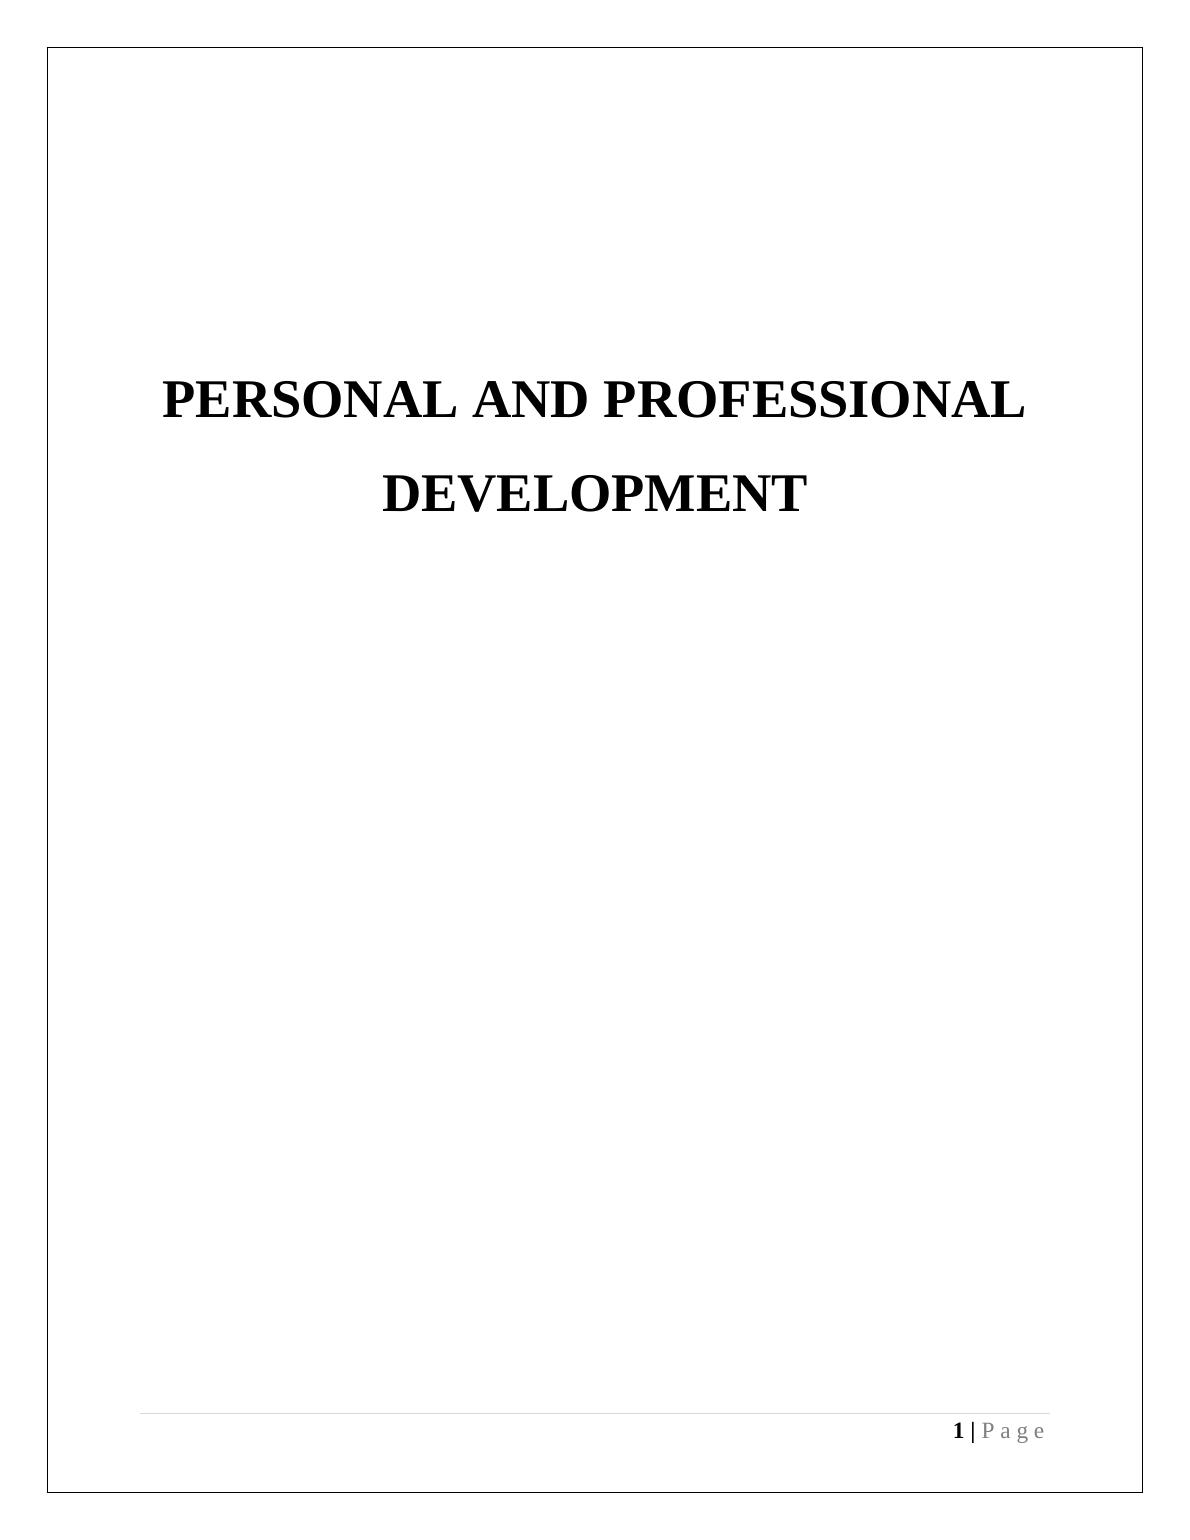 Introduction to Personal and Professional Development_1